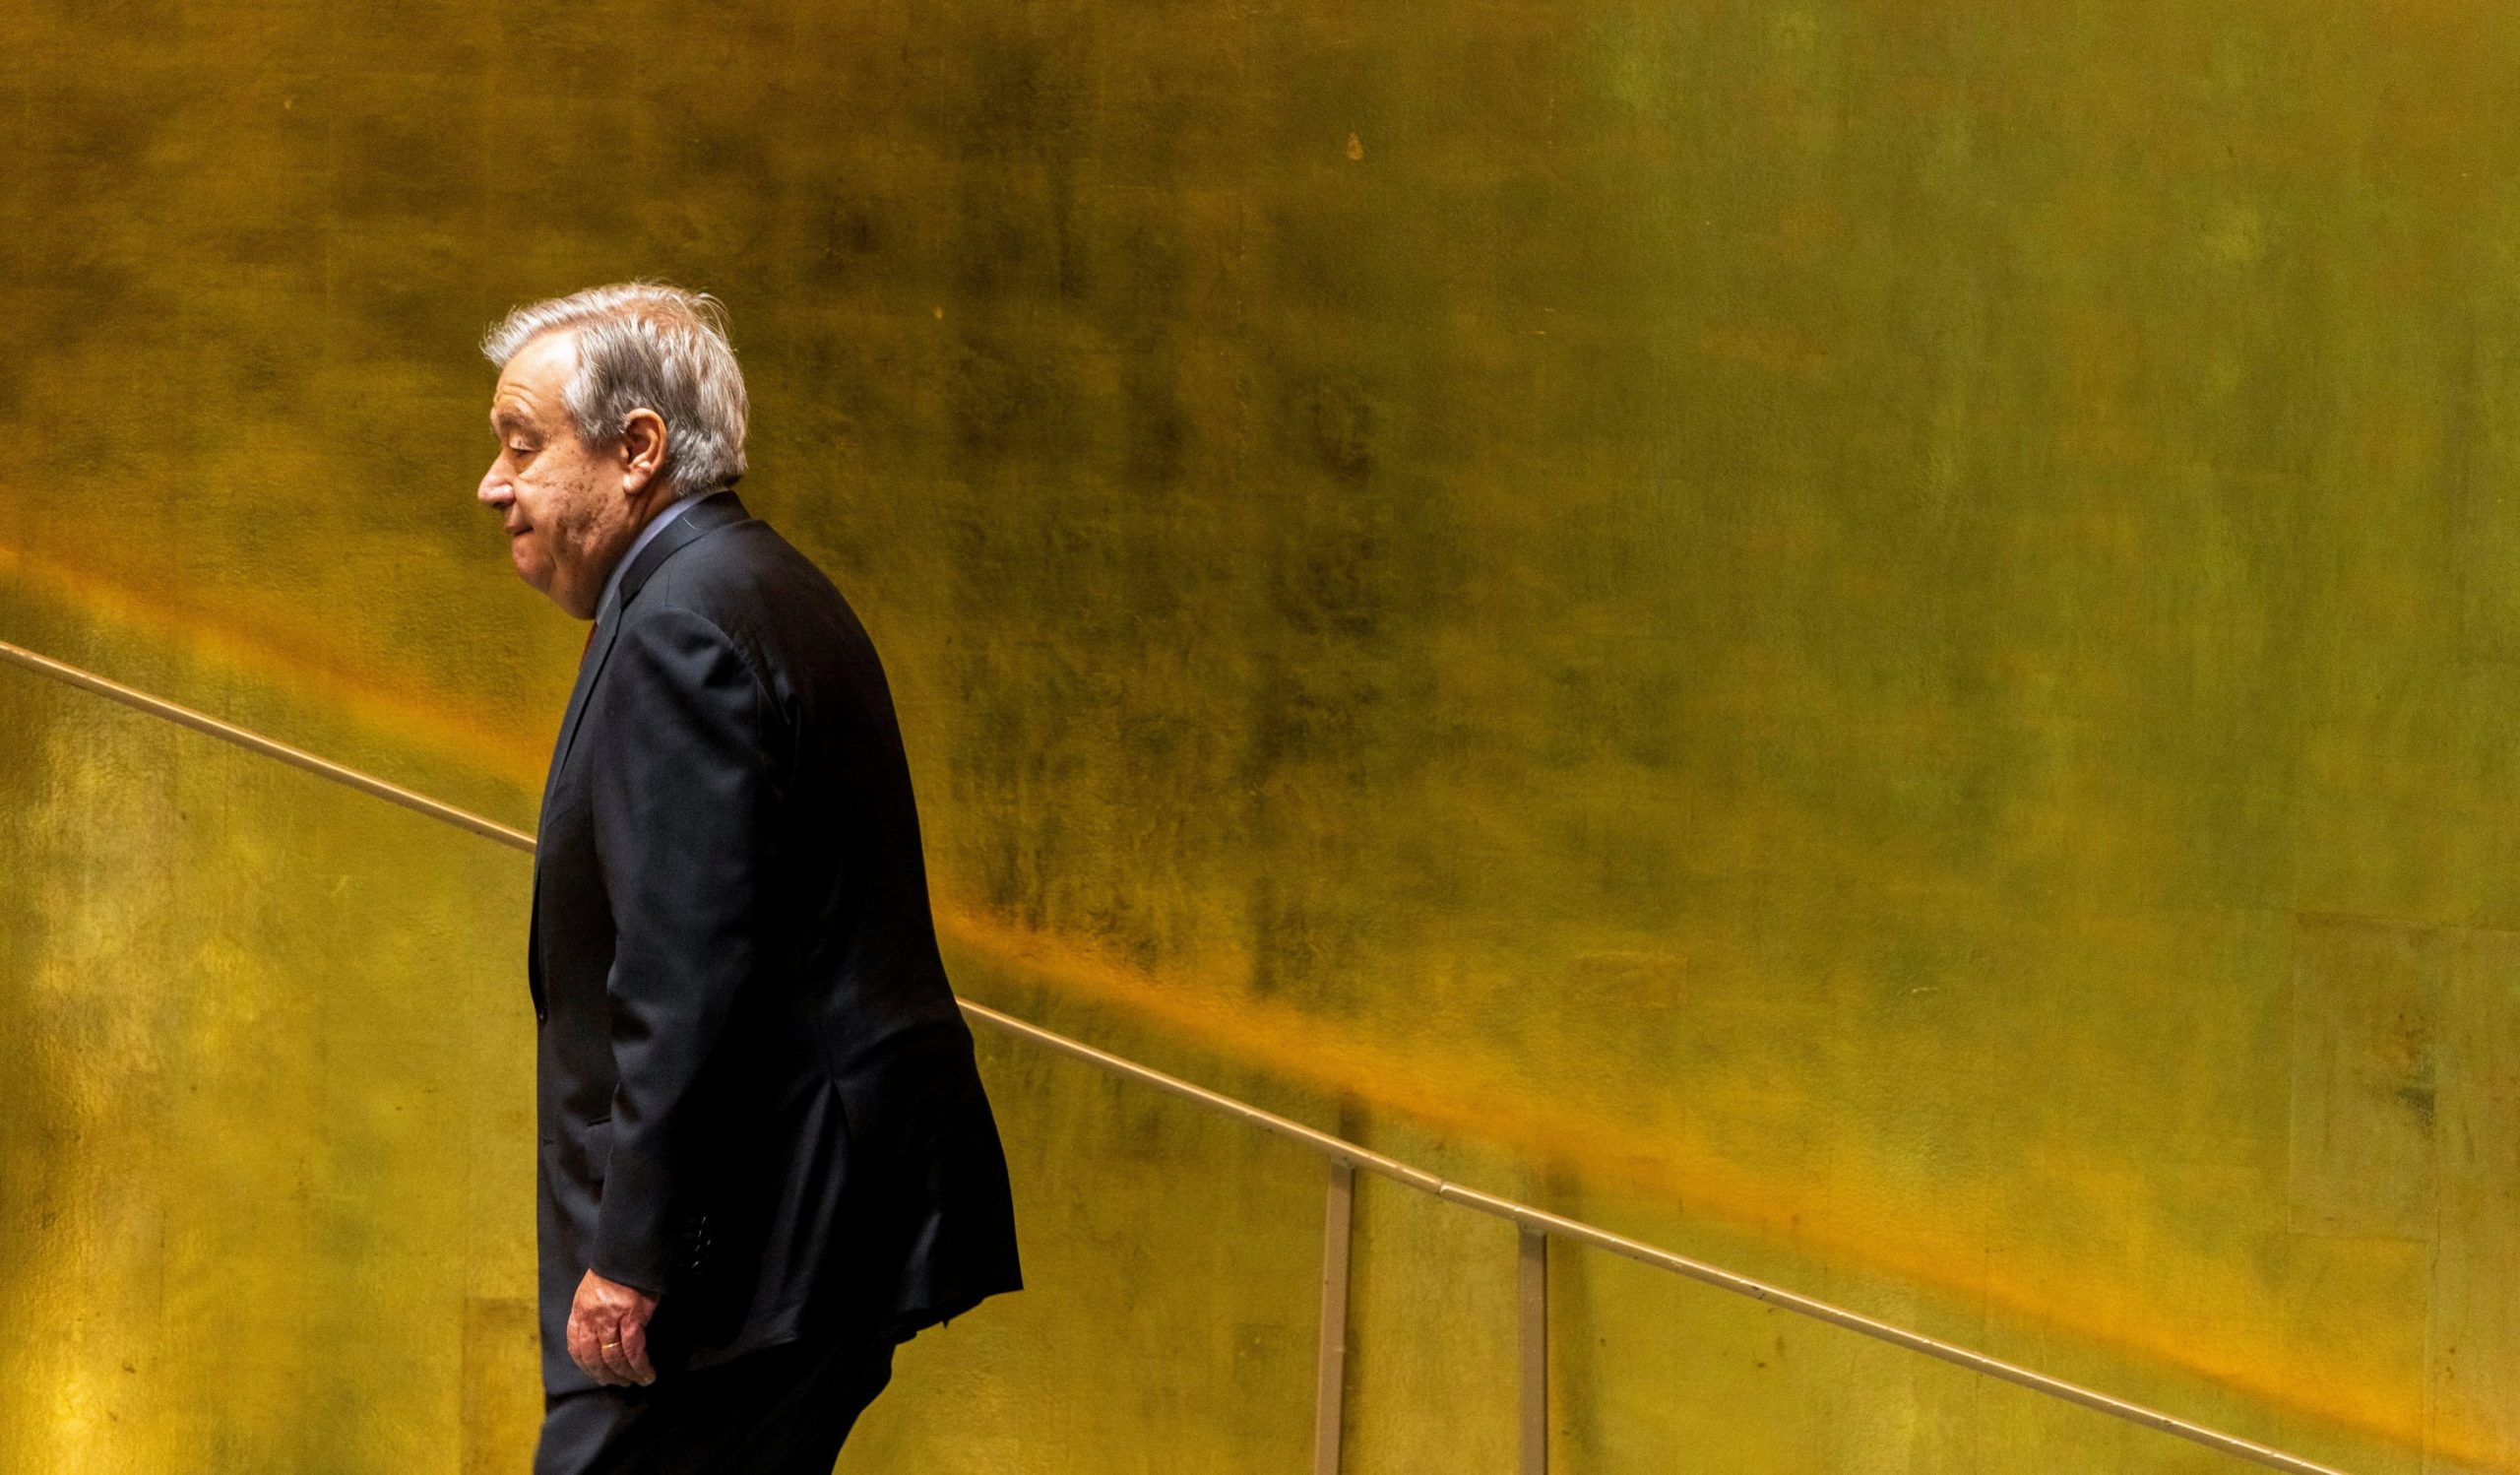 United Nations Secretary-General Antonio Guterres made an incorrect claim